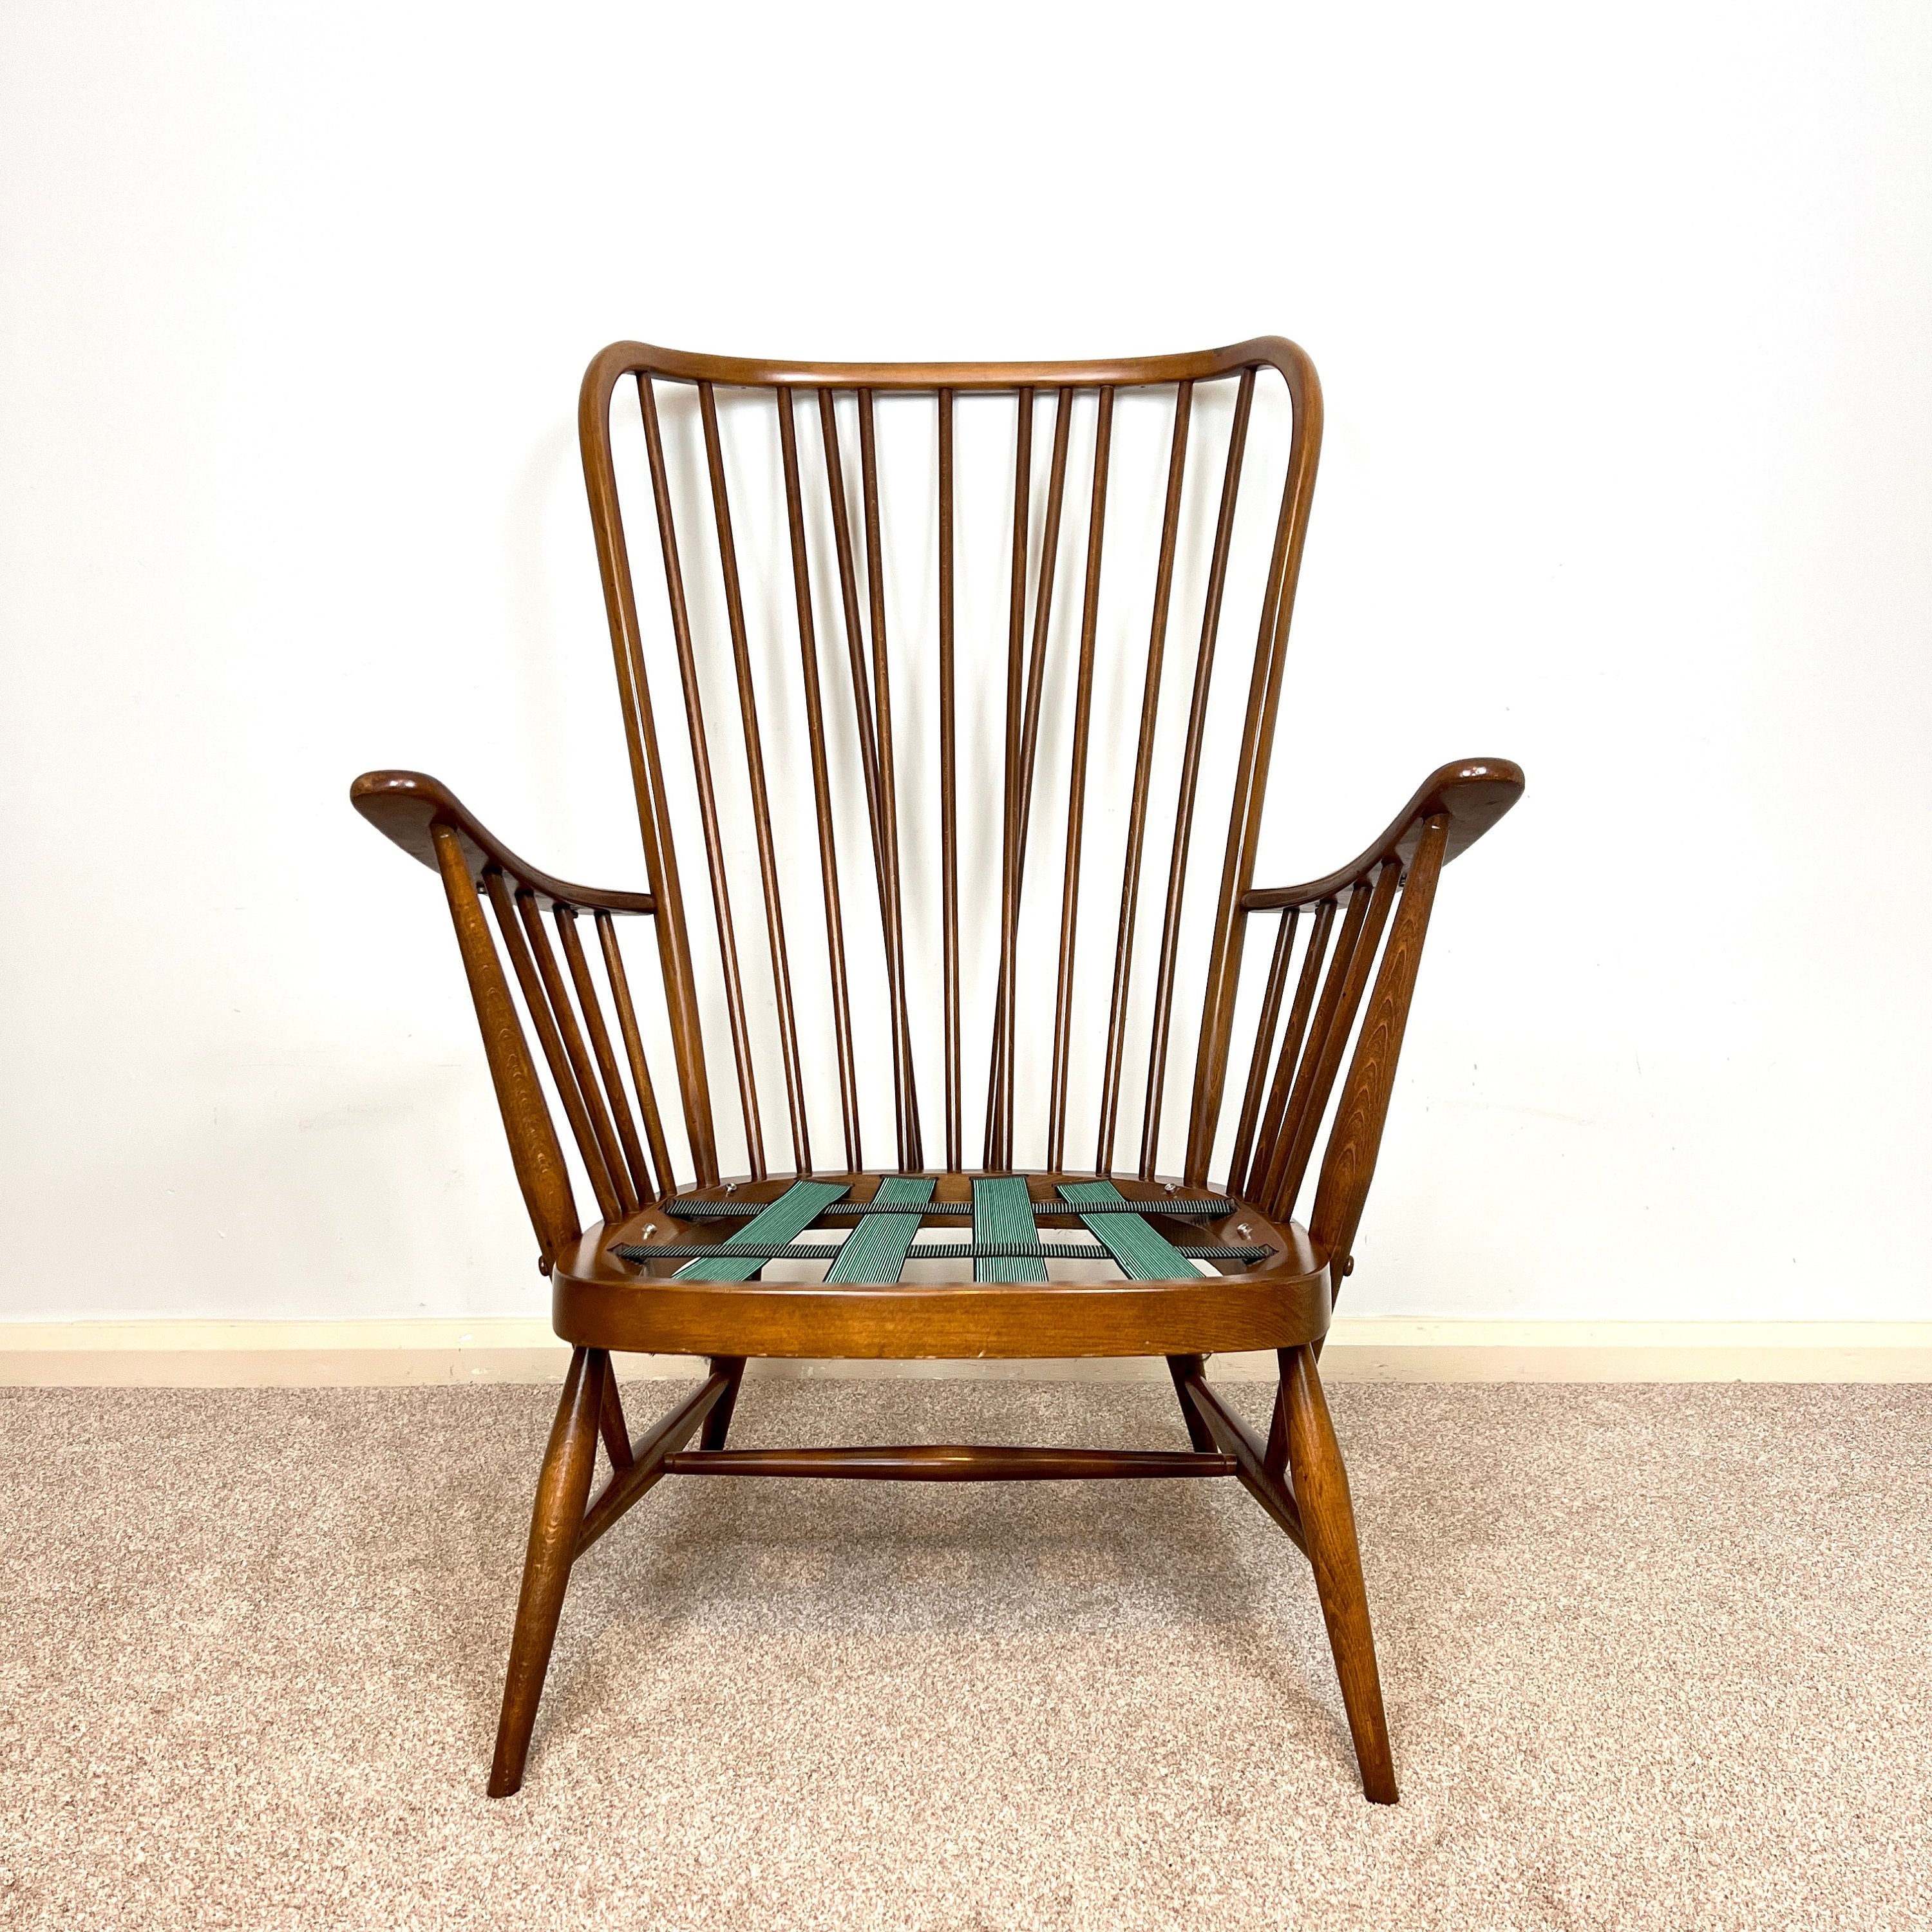 Vintage Ercol  Evergreen High back Accent Chair, Armchair